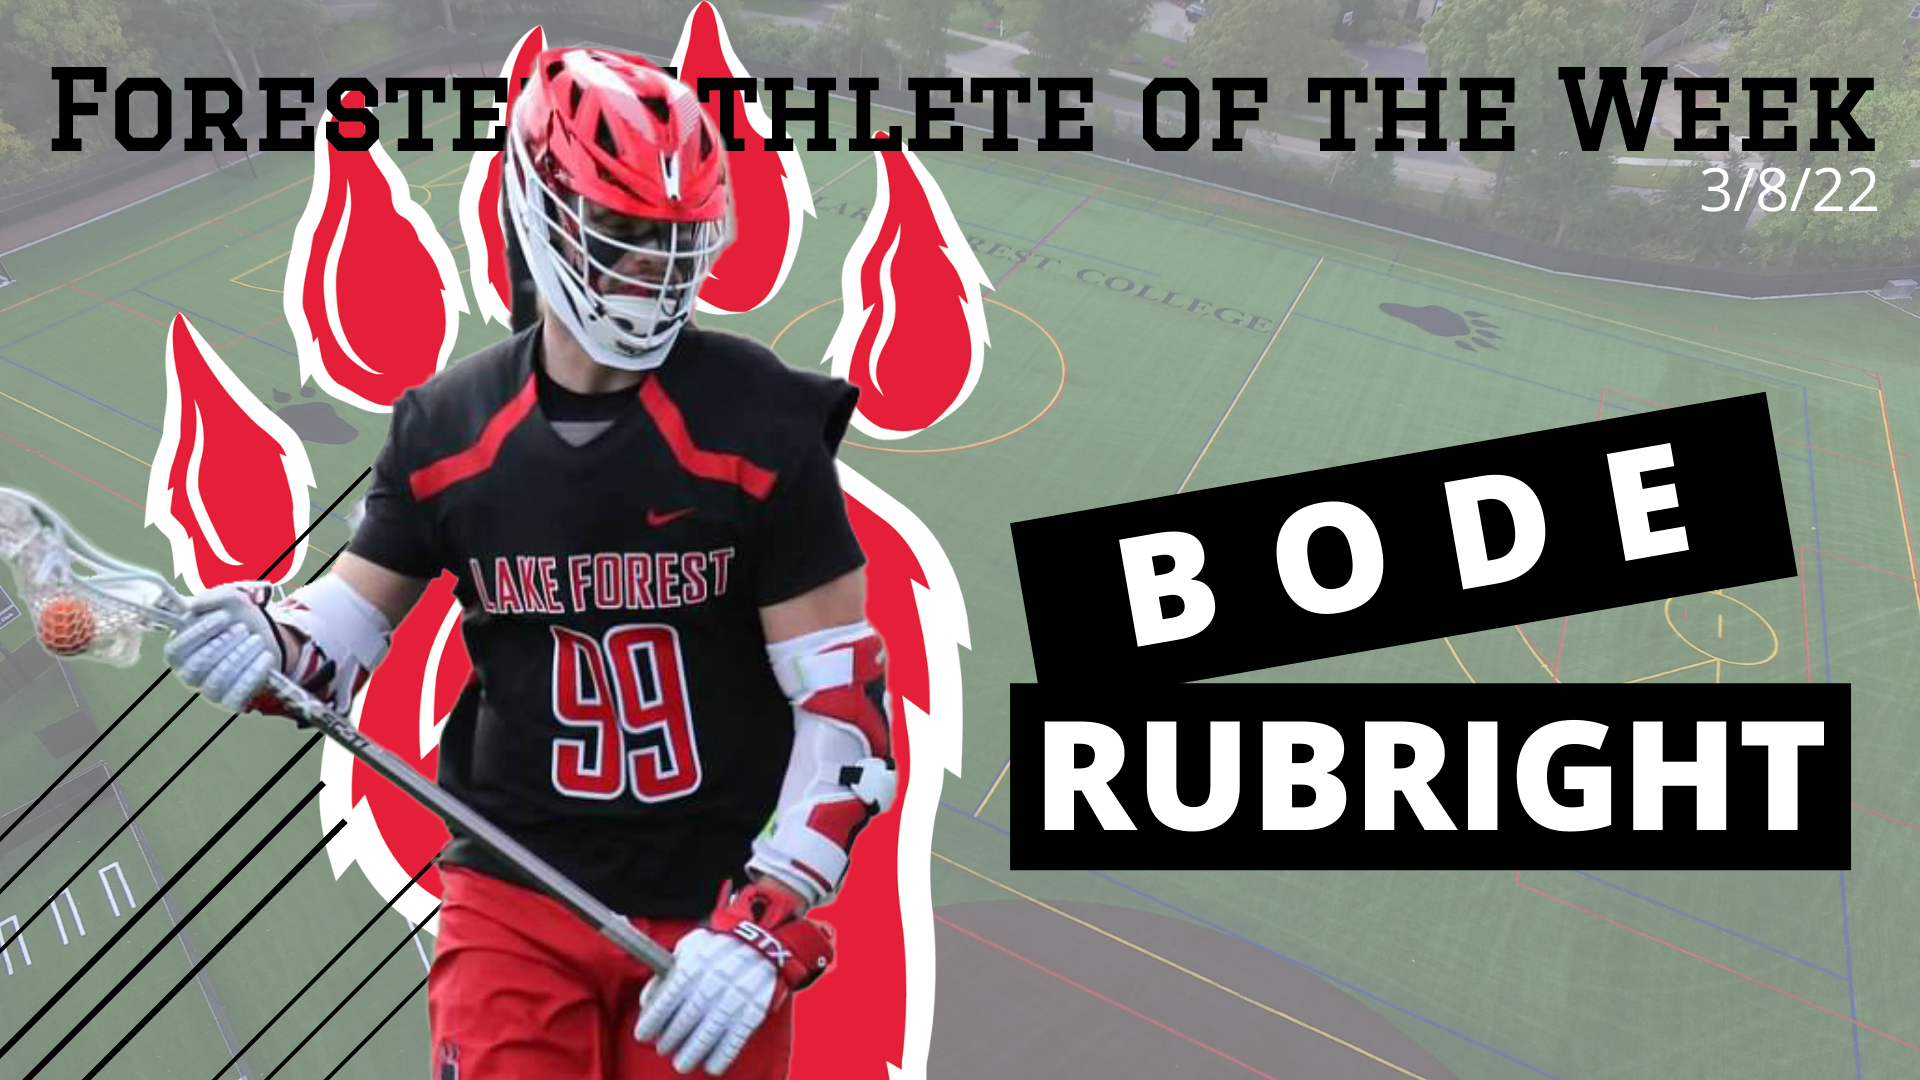 Bode Rubright Named Men's Forester Athlete of the Week